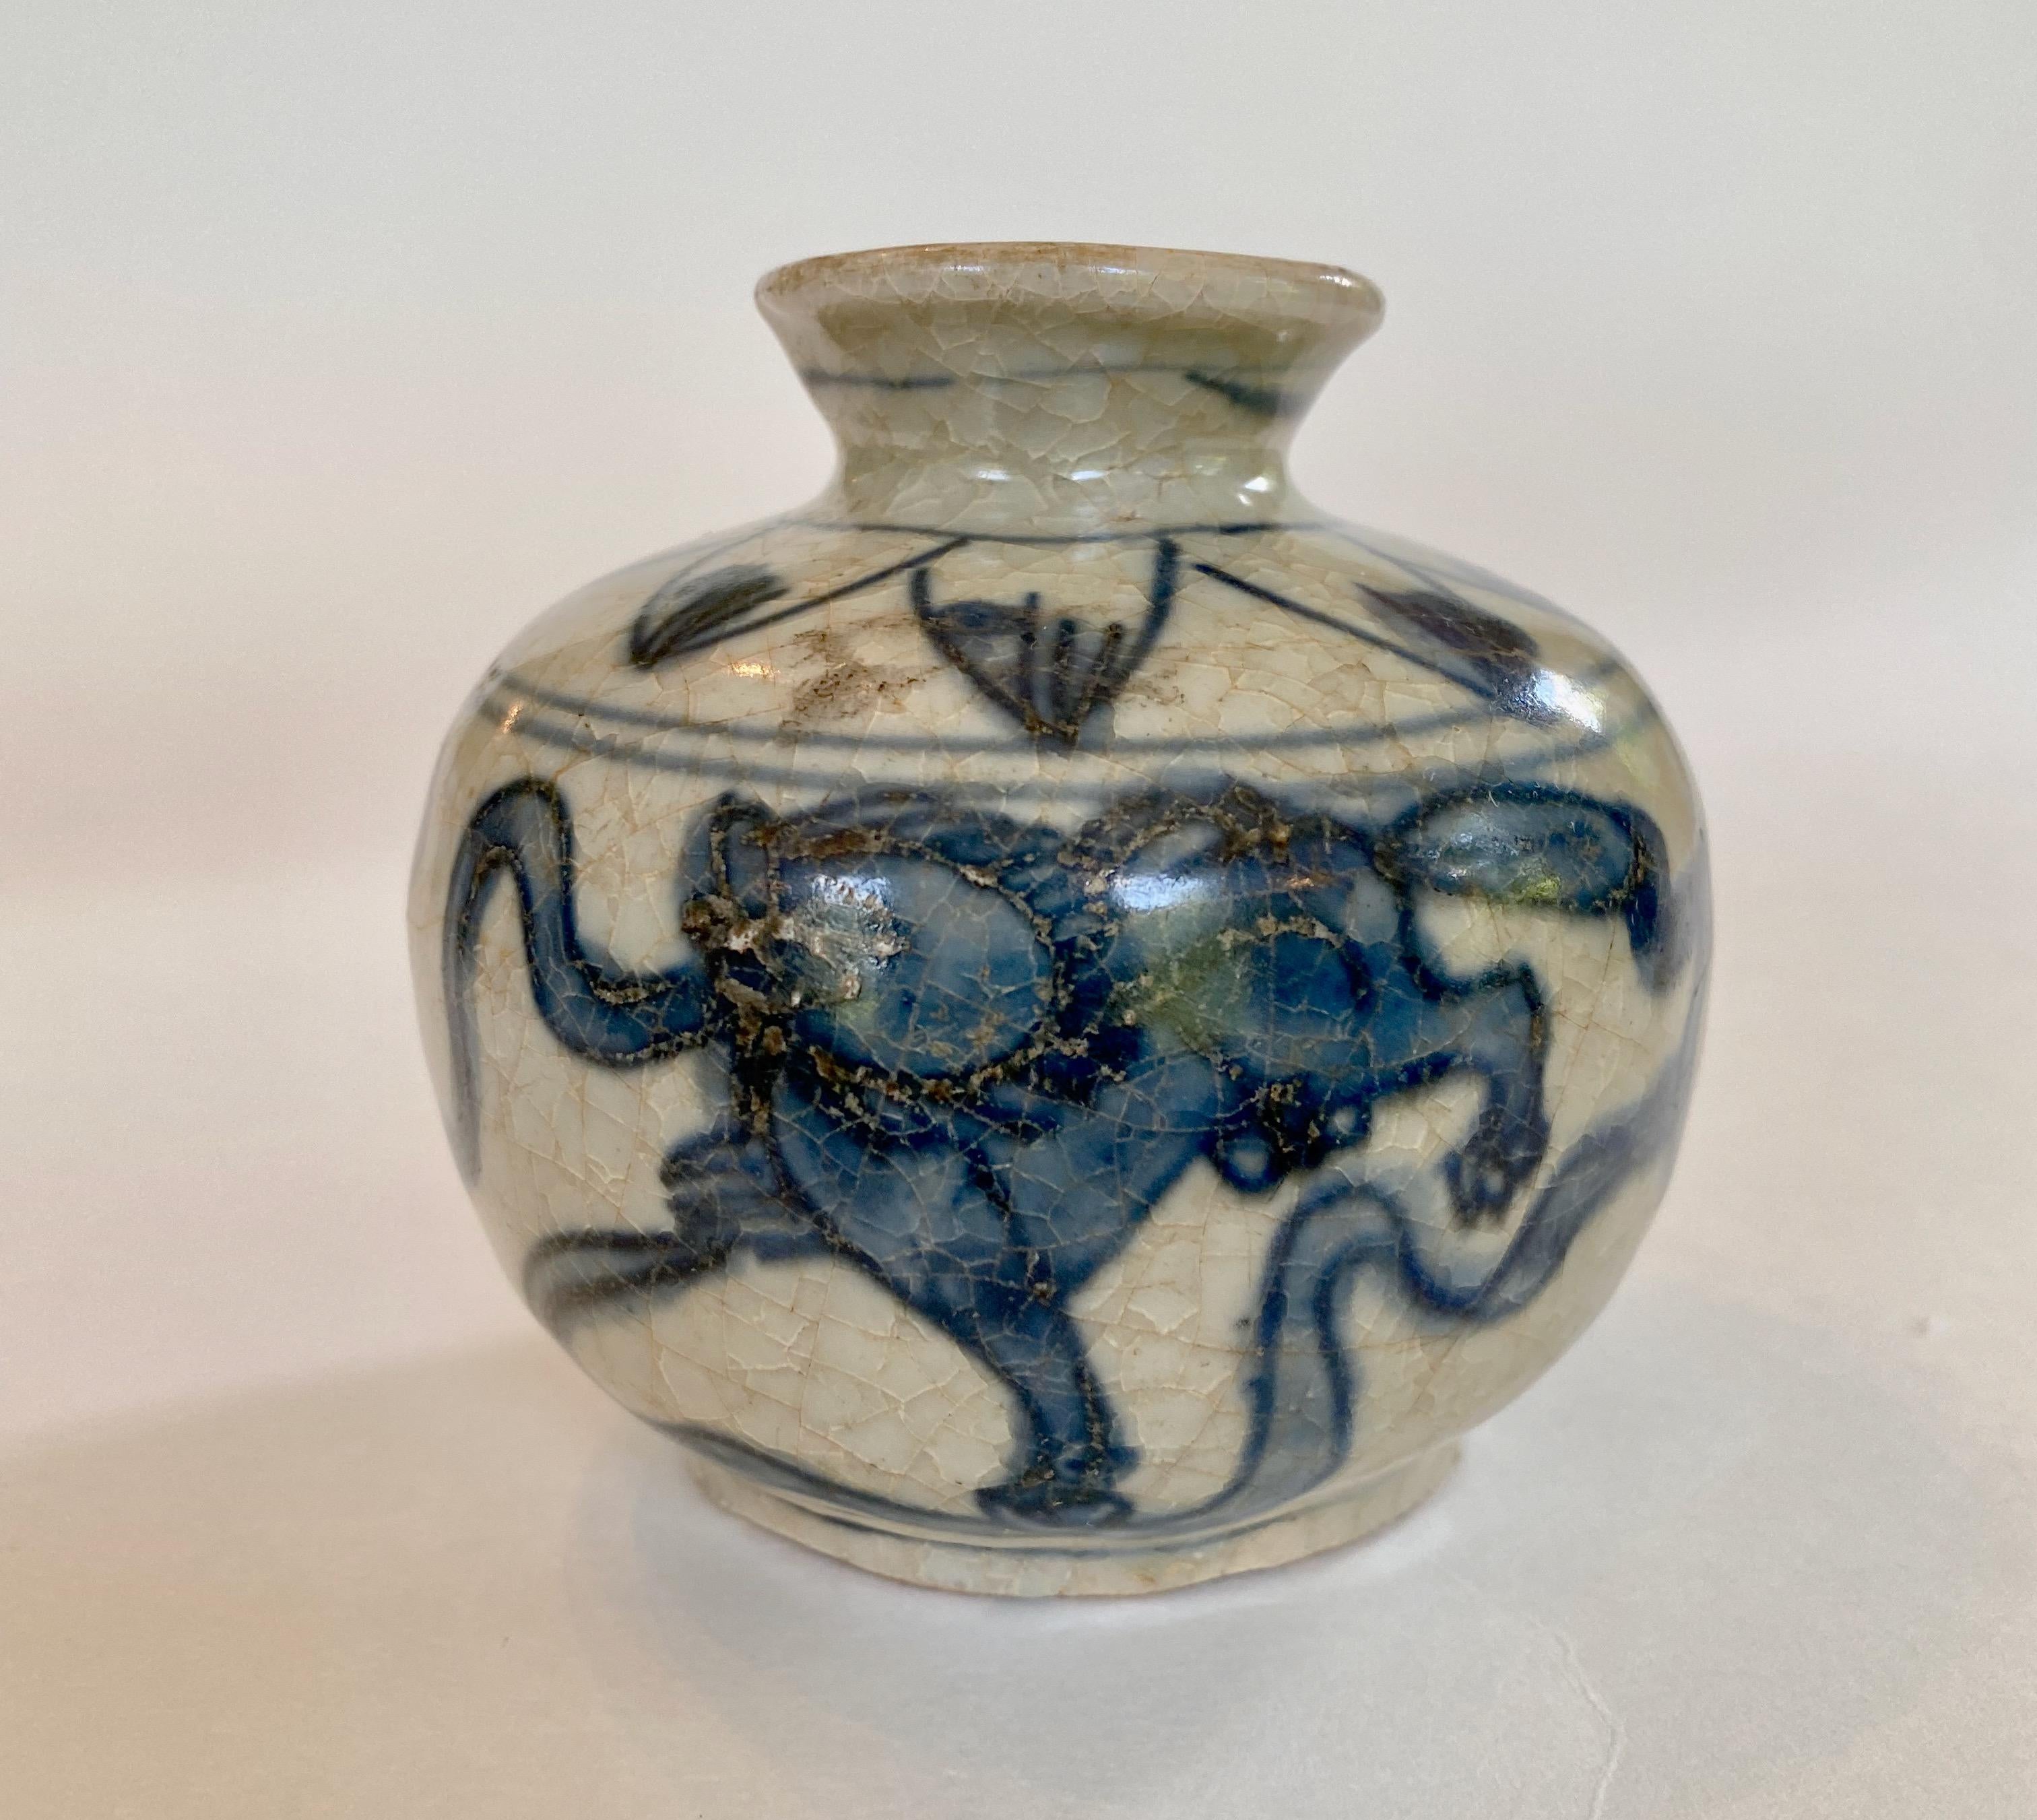 Ming dynasty blue and white jarlet decorated with lions, 16th century. 
This jarlet of deep cobalt blue on an off-white, almost bisque, background has an attractive crackled glaze and a kinetic design. The decoration represents two romping lions